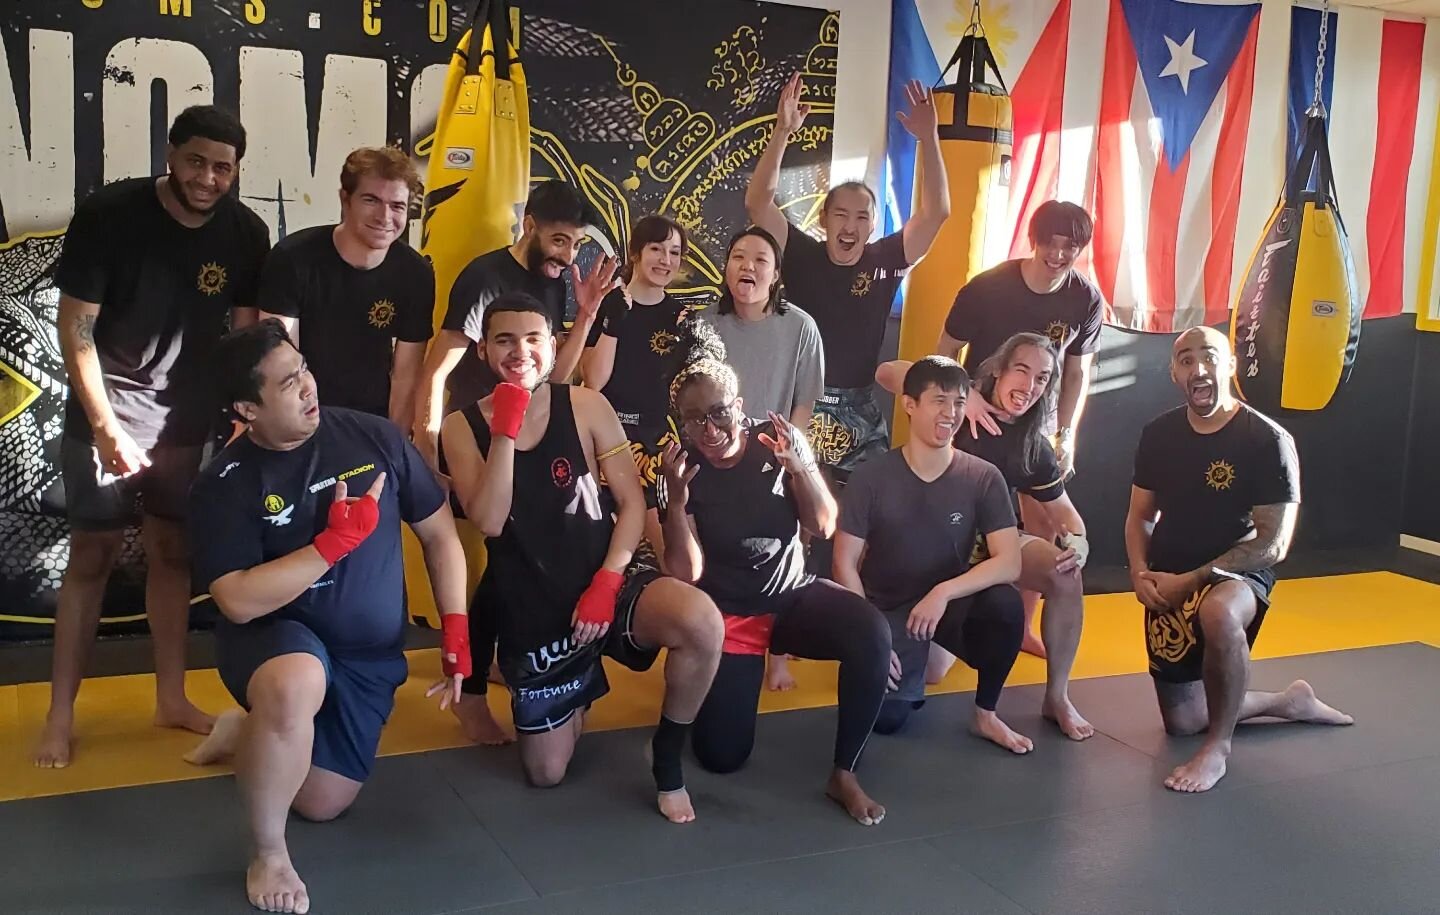 Good morning! 7am crew in the Muay Thai Basics class! Up next 10am mixed level

Nothing screams dedication more than having the sun come up while you're smashing pads🙏 Best way to start the day

#sunrise #dedication #muaythai #7am #basics #muaythaib